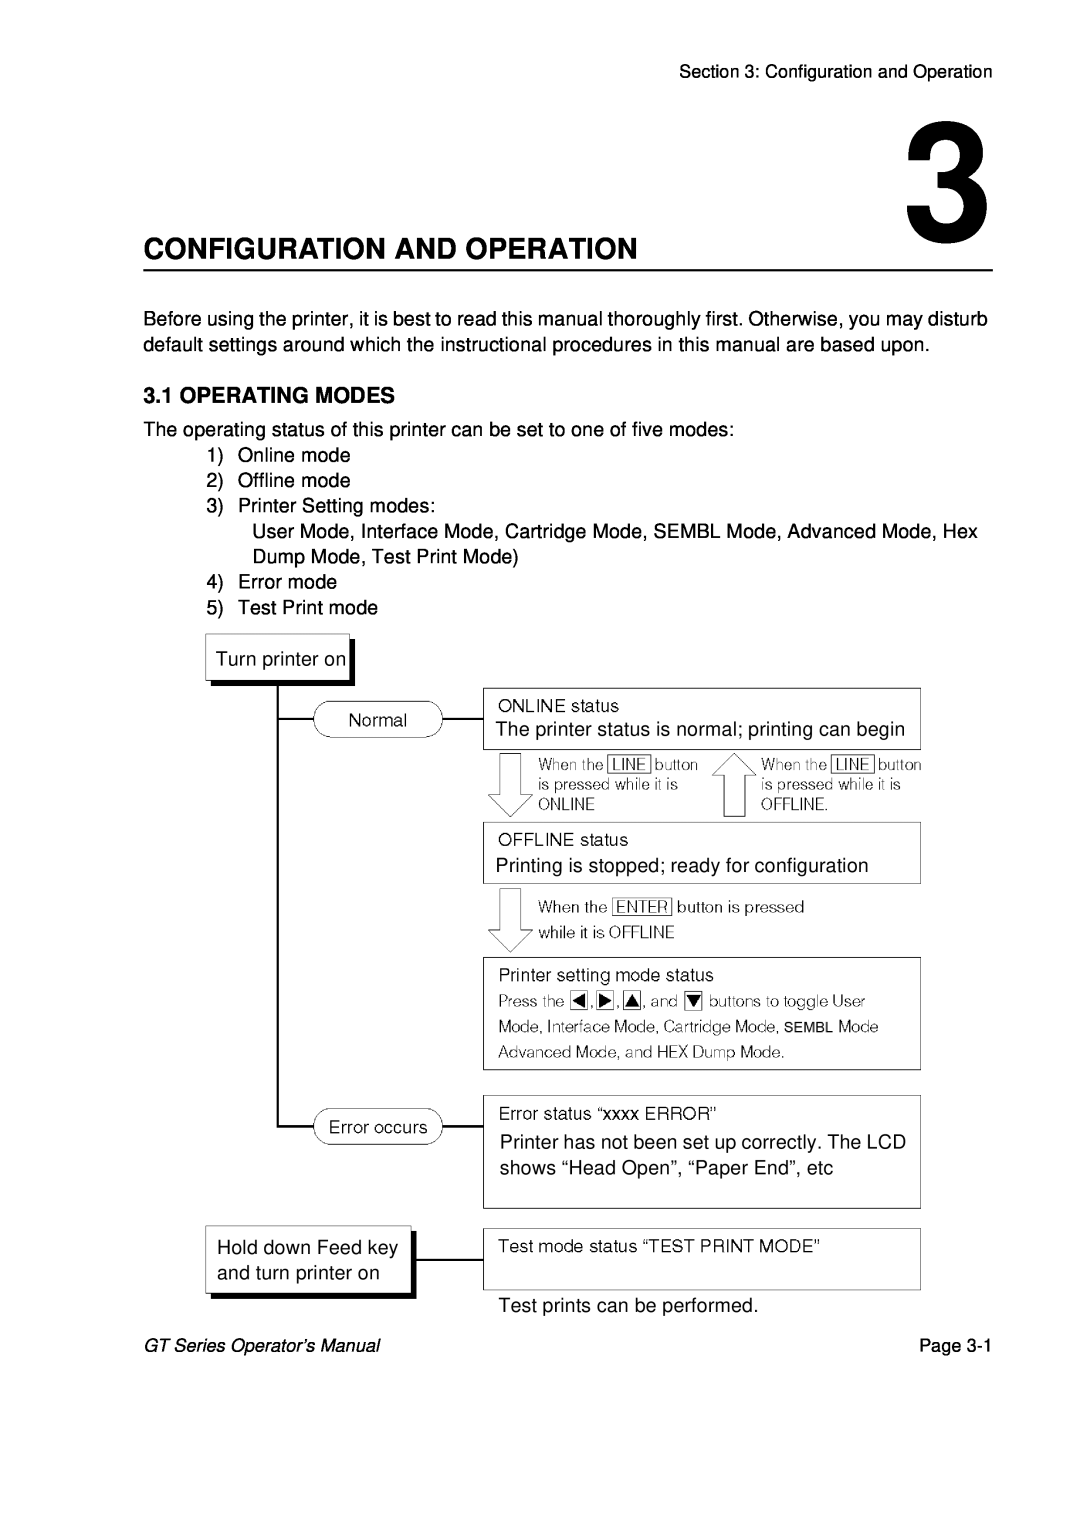 SATO GT424 manual Configuration And Operation, Operating Modes 